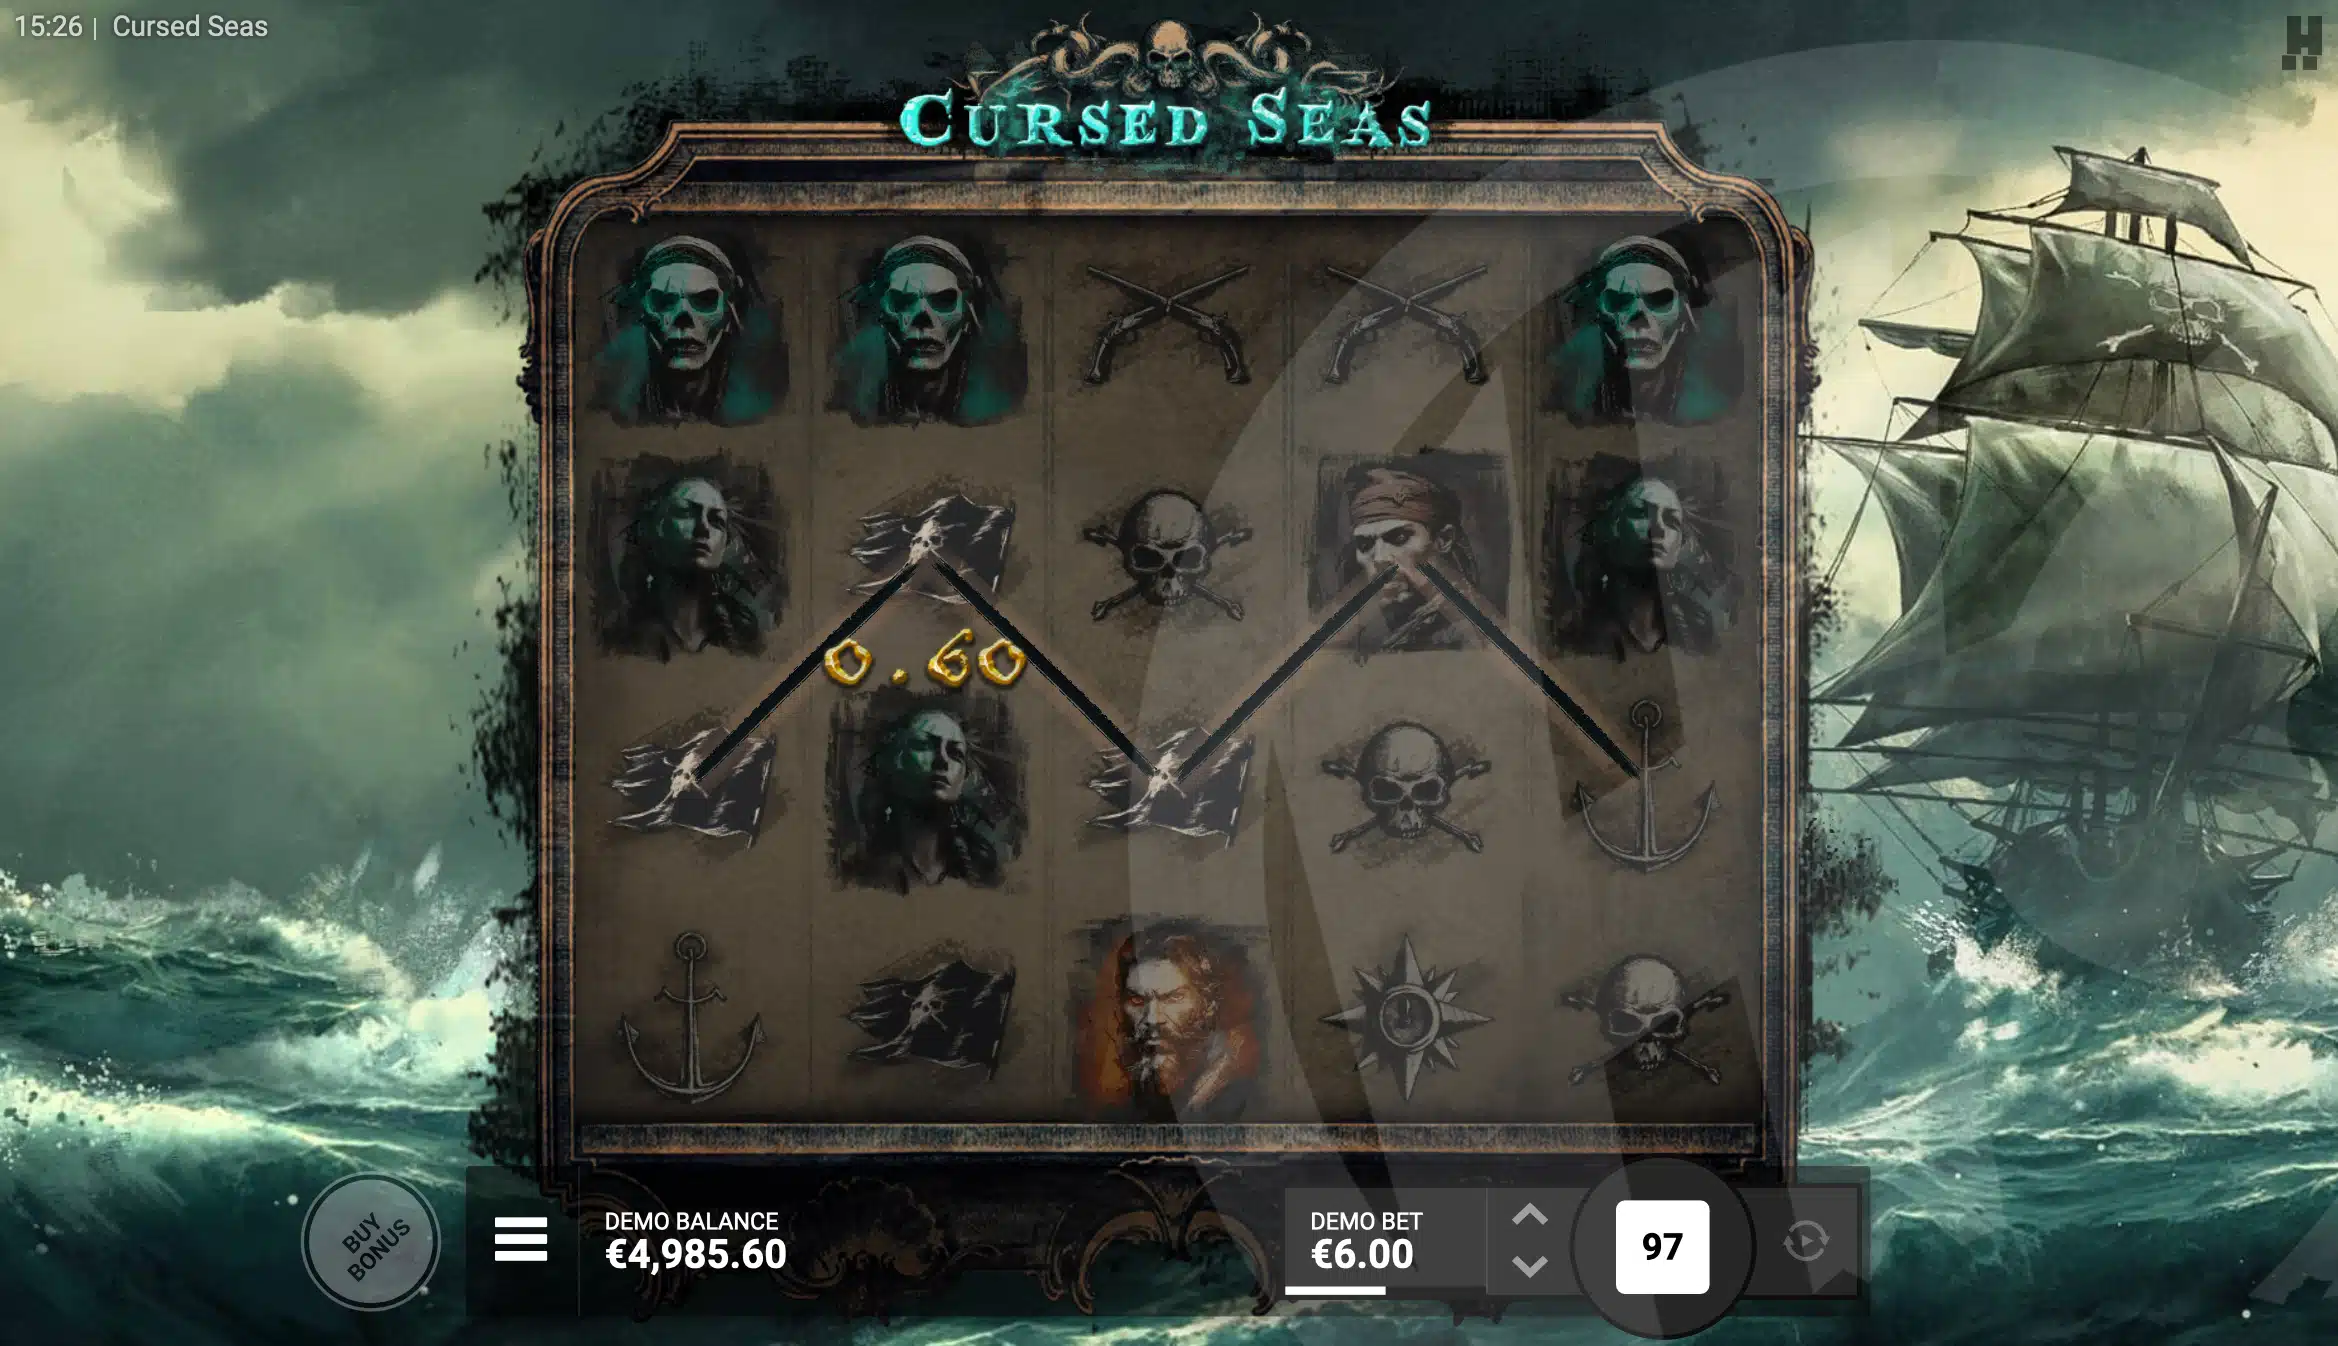 Cursed Seas Offers Players 26 Fixed Win Lines